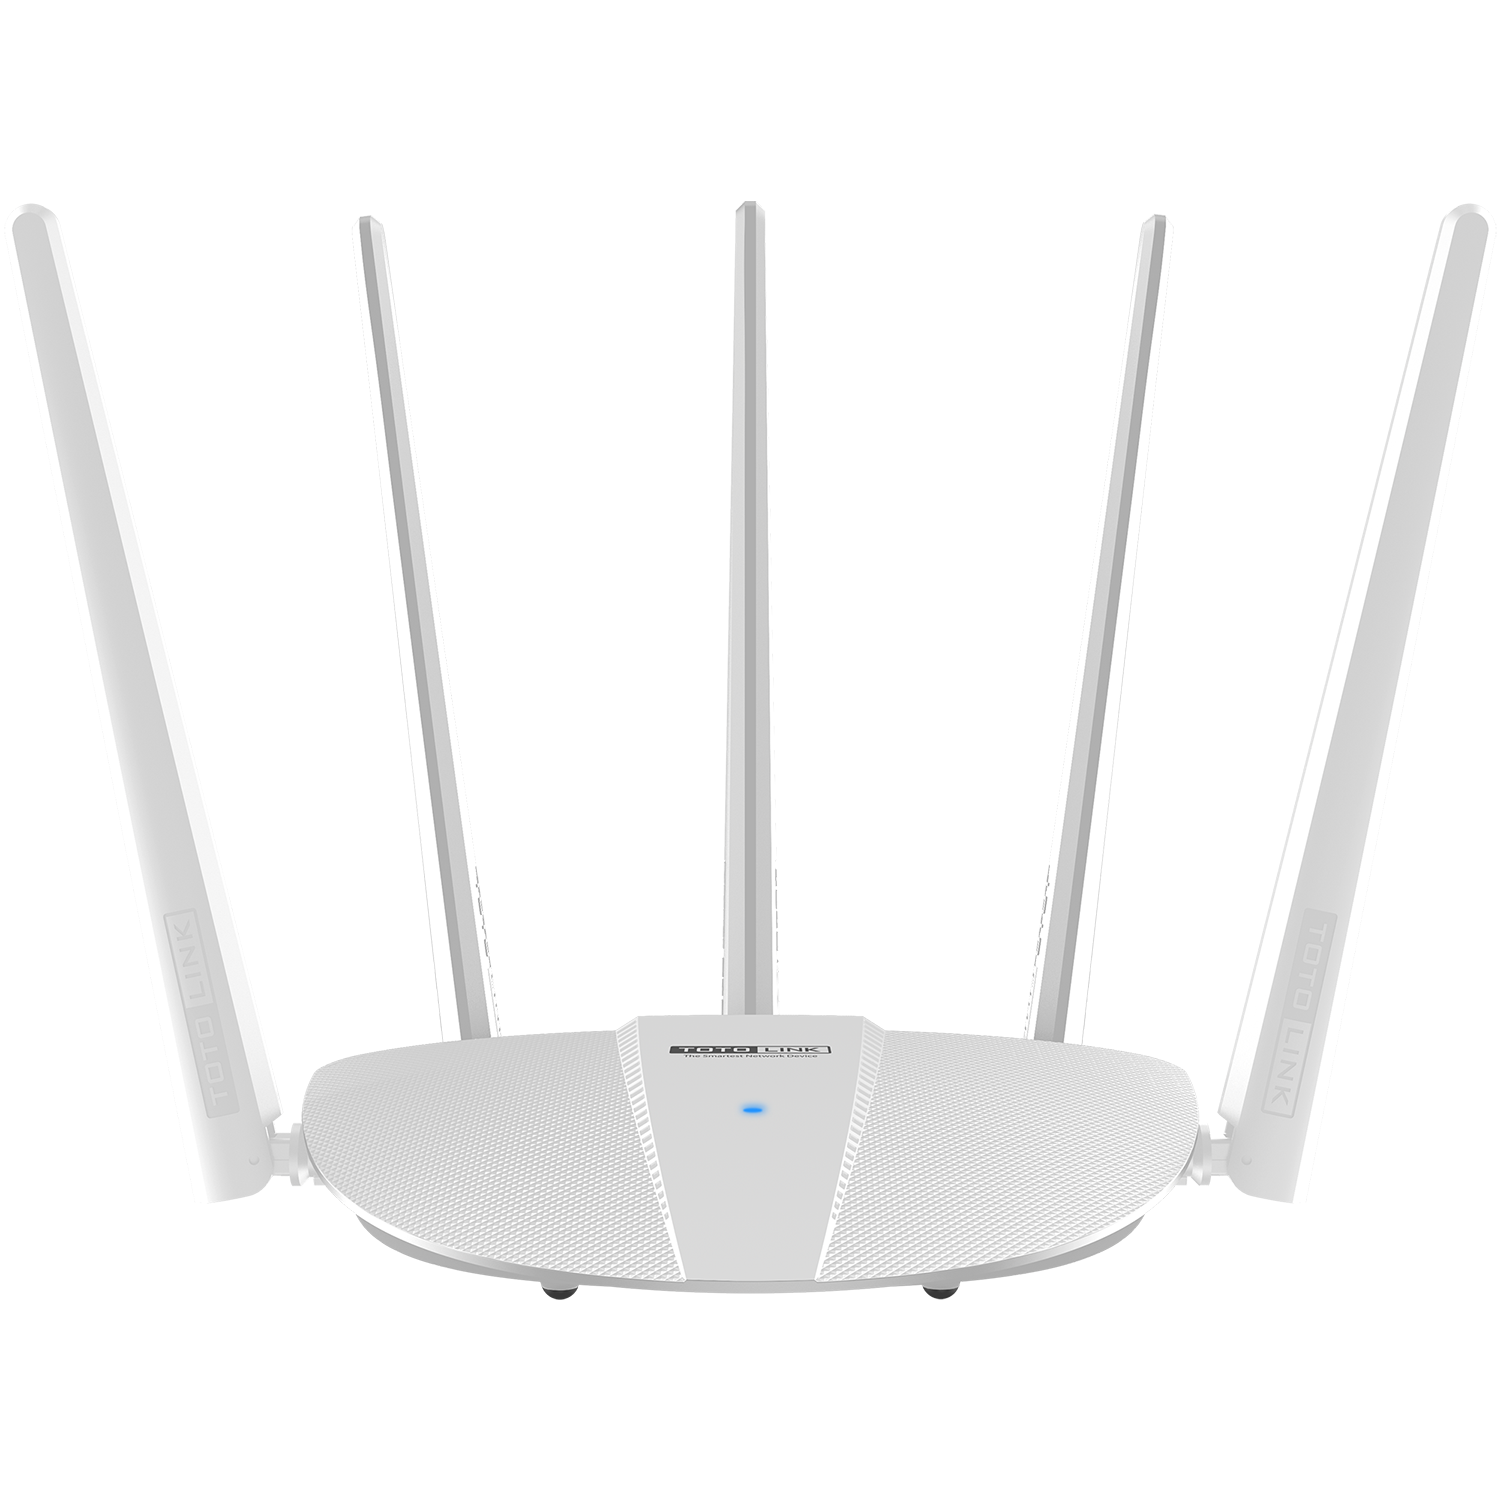 TOTOLINK (A810R) 11AC 1200Mbps Dual Band WiFi Router with Gigabit WAN Port and 5pcs of External Antennas